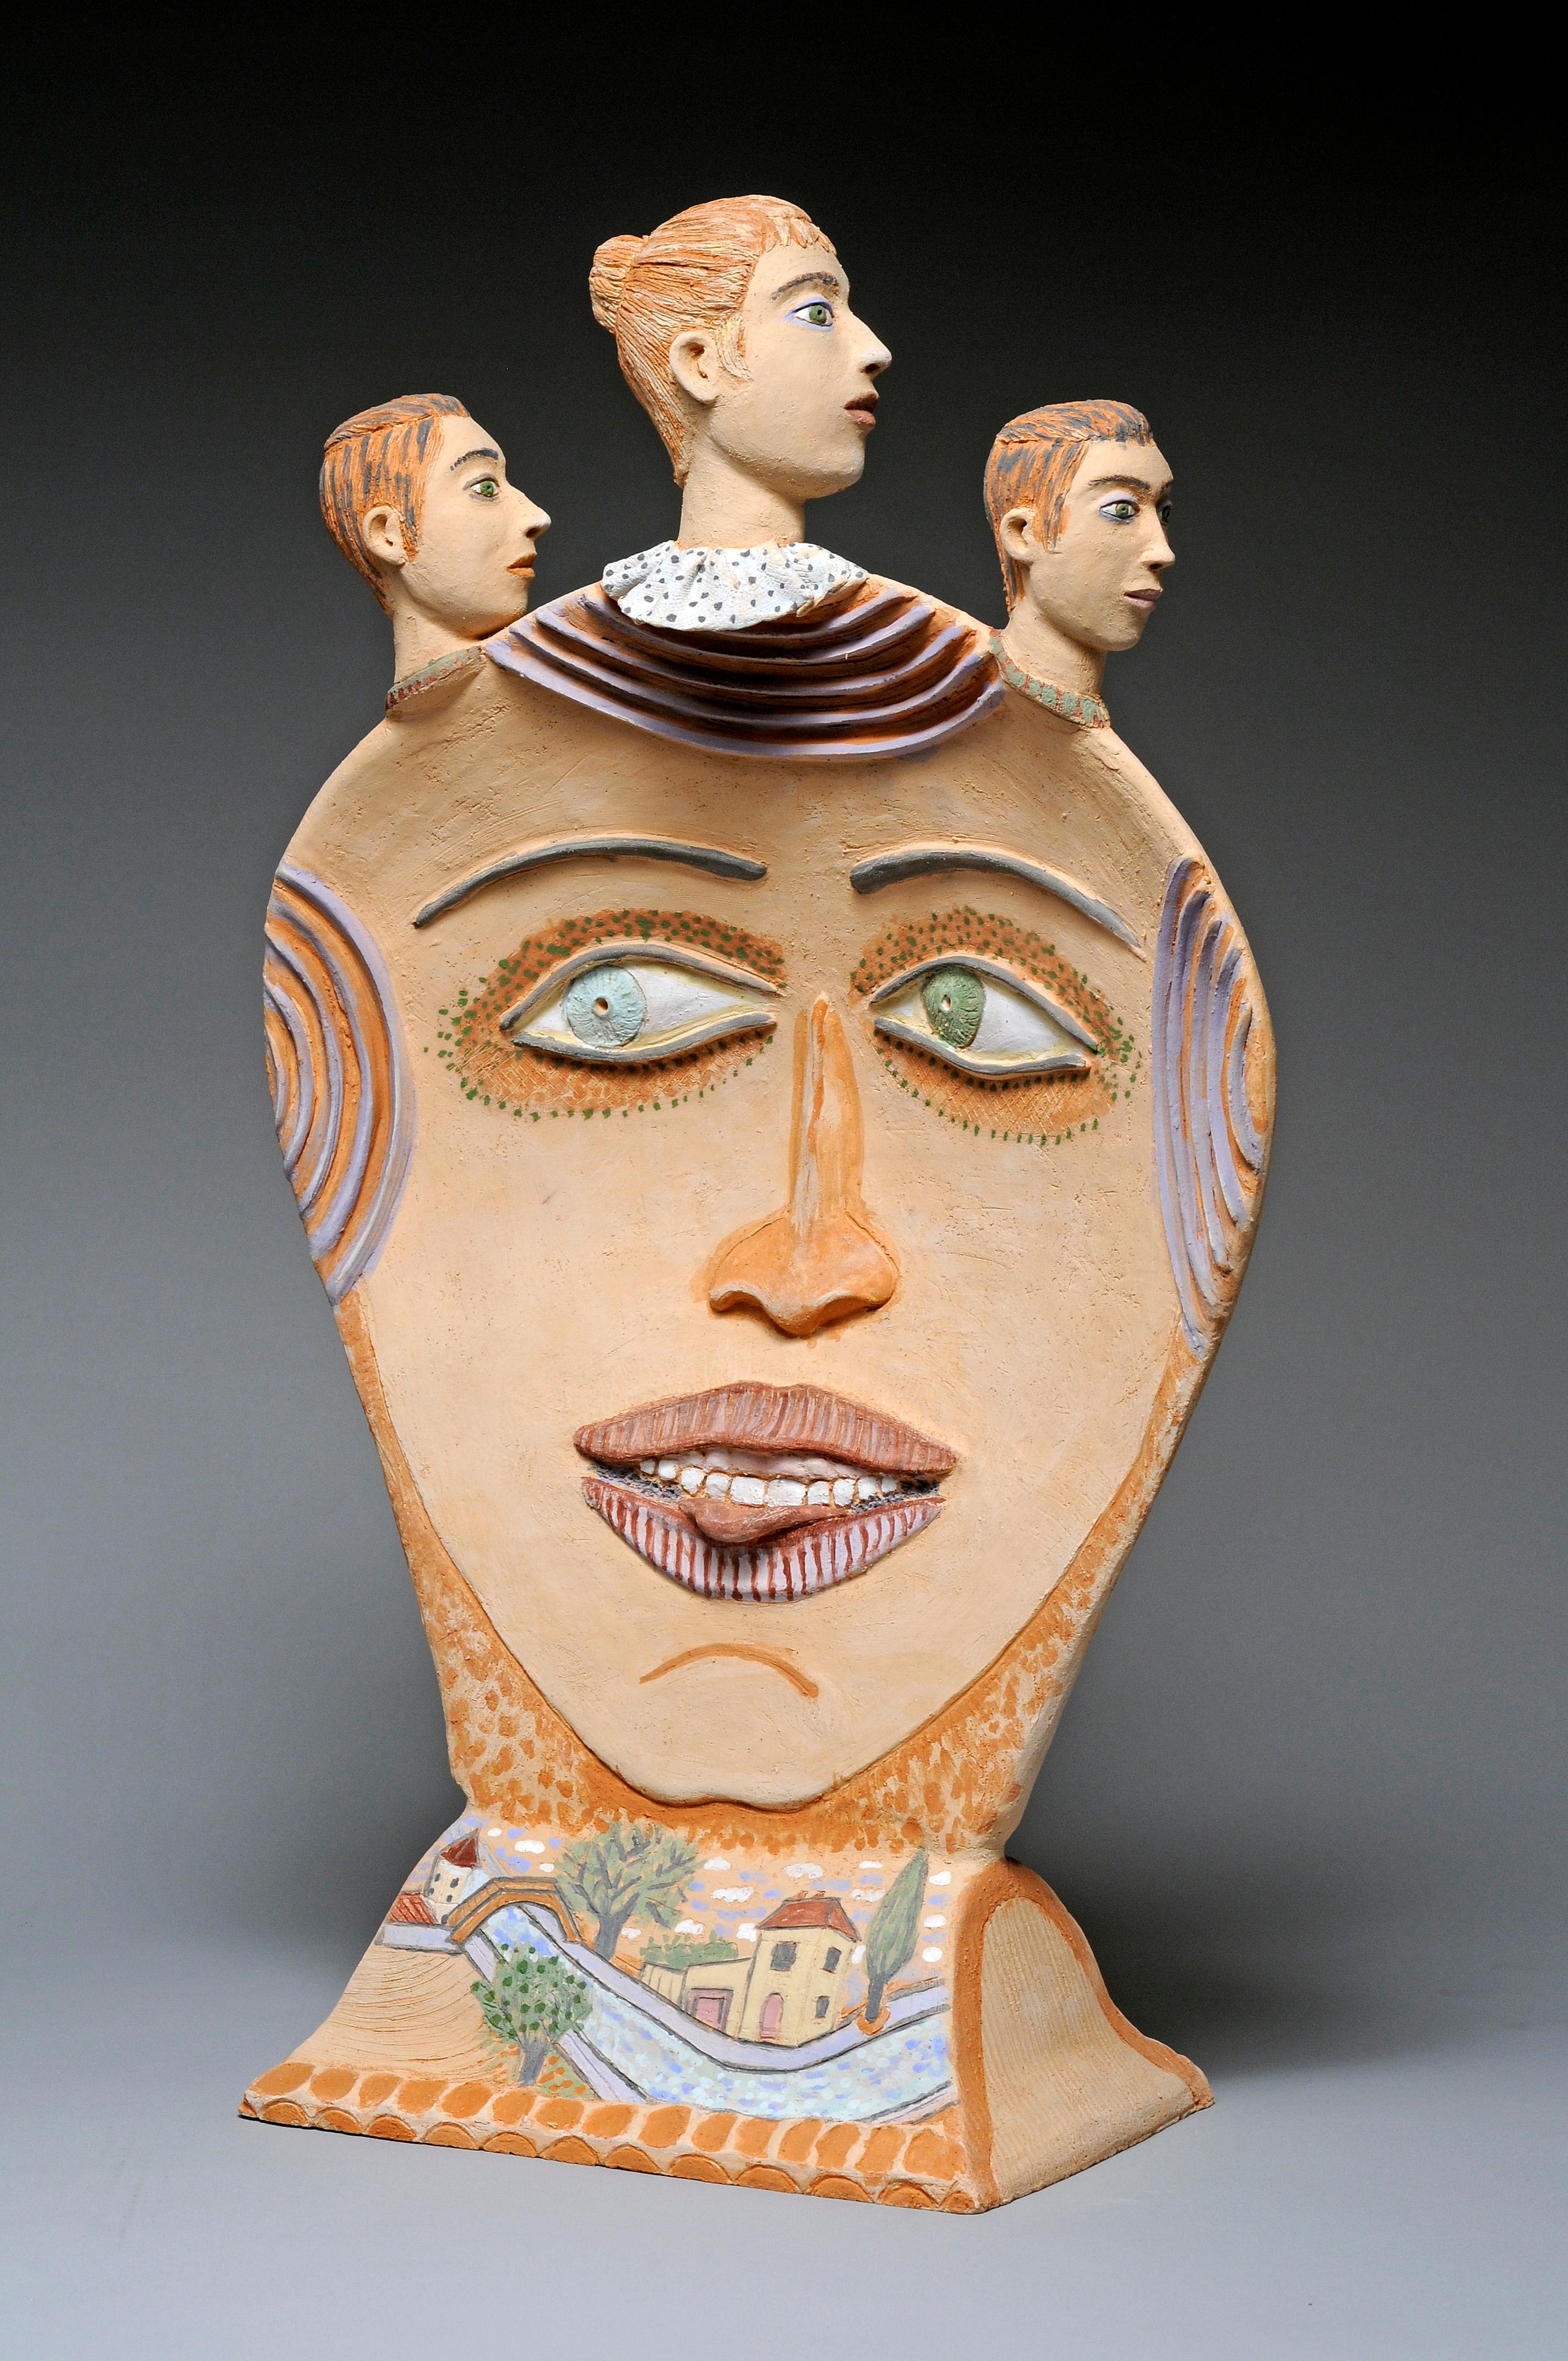 Unique terracotta sculpture
Hand-signed by the artist

Nili PINCAS was born in 1942 in Tel Aviv, in Israel.
She studied at the Avni Art Institute of Tel Aviv in Israël and at the Ecole Nationale Supérieure des Beaux-Arts in Paris.
She has lived and